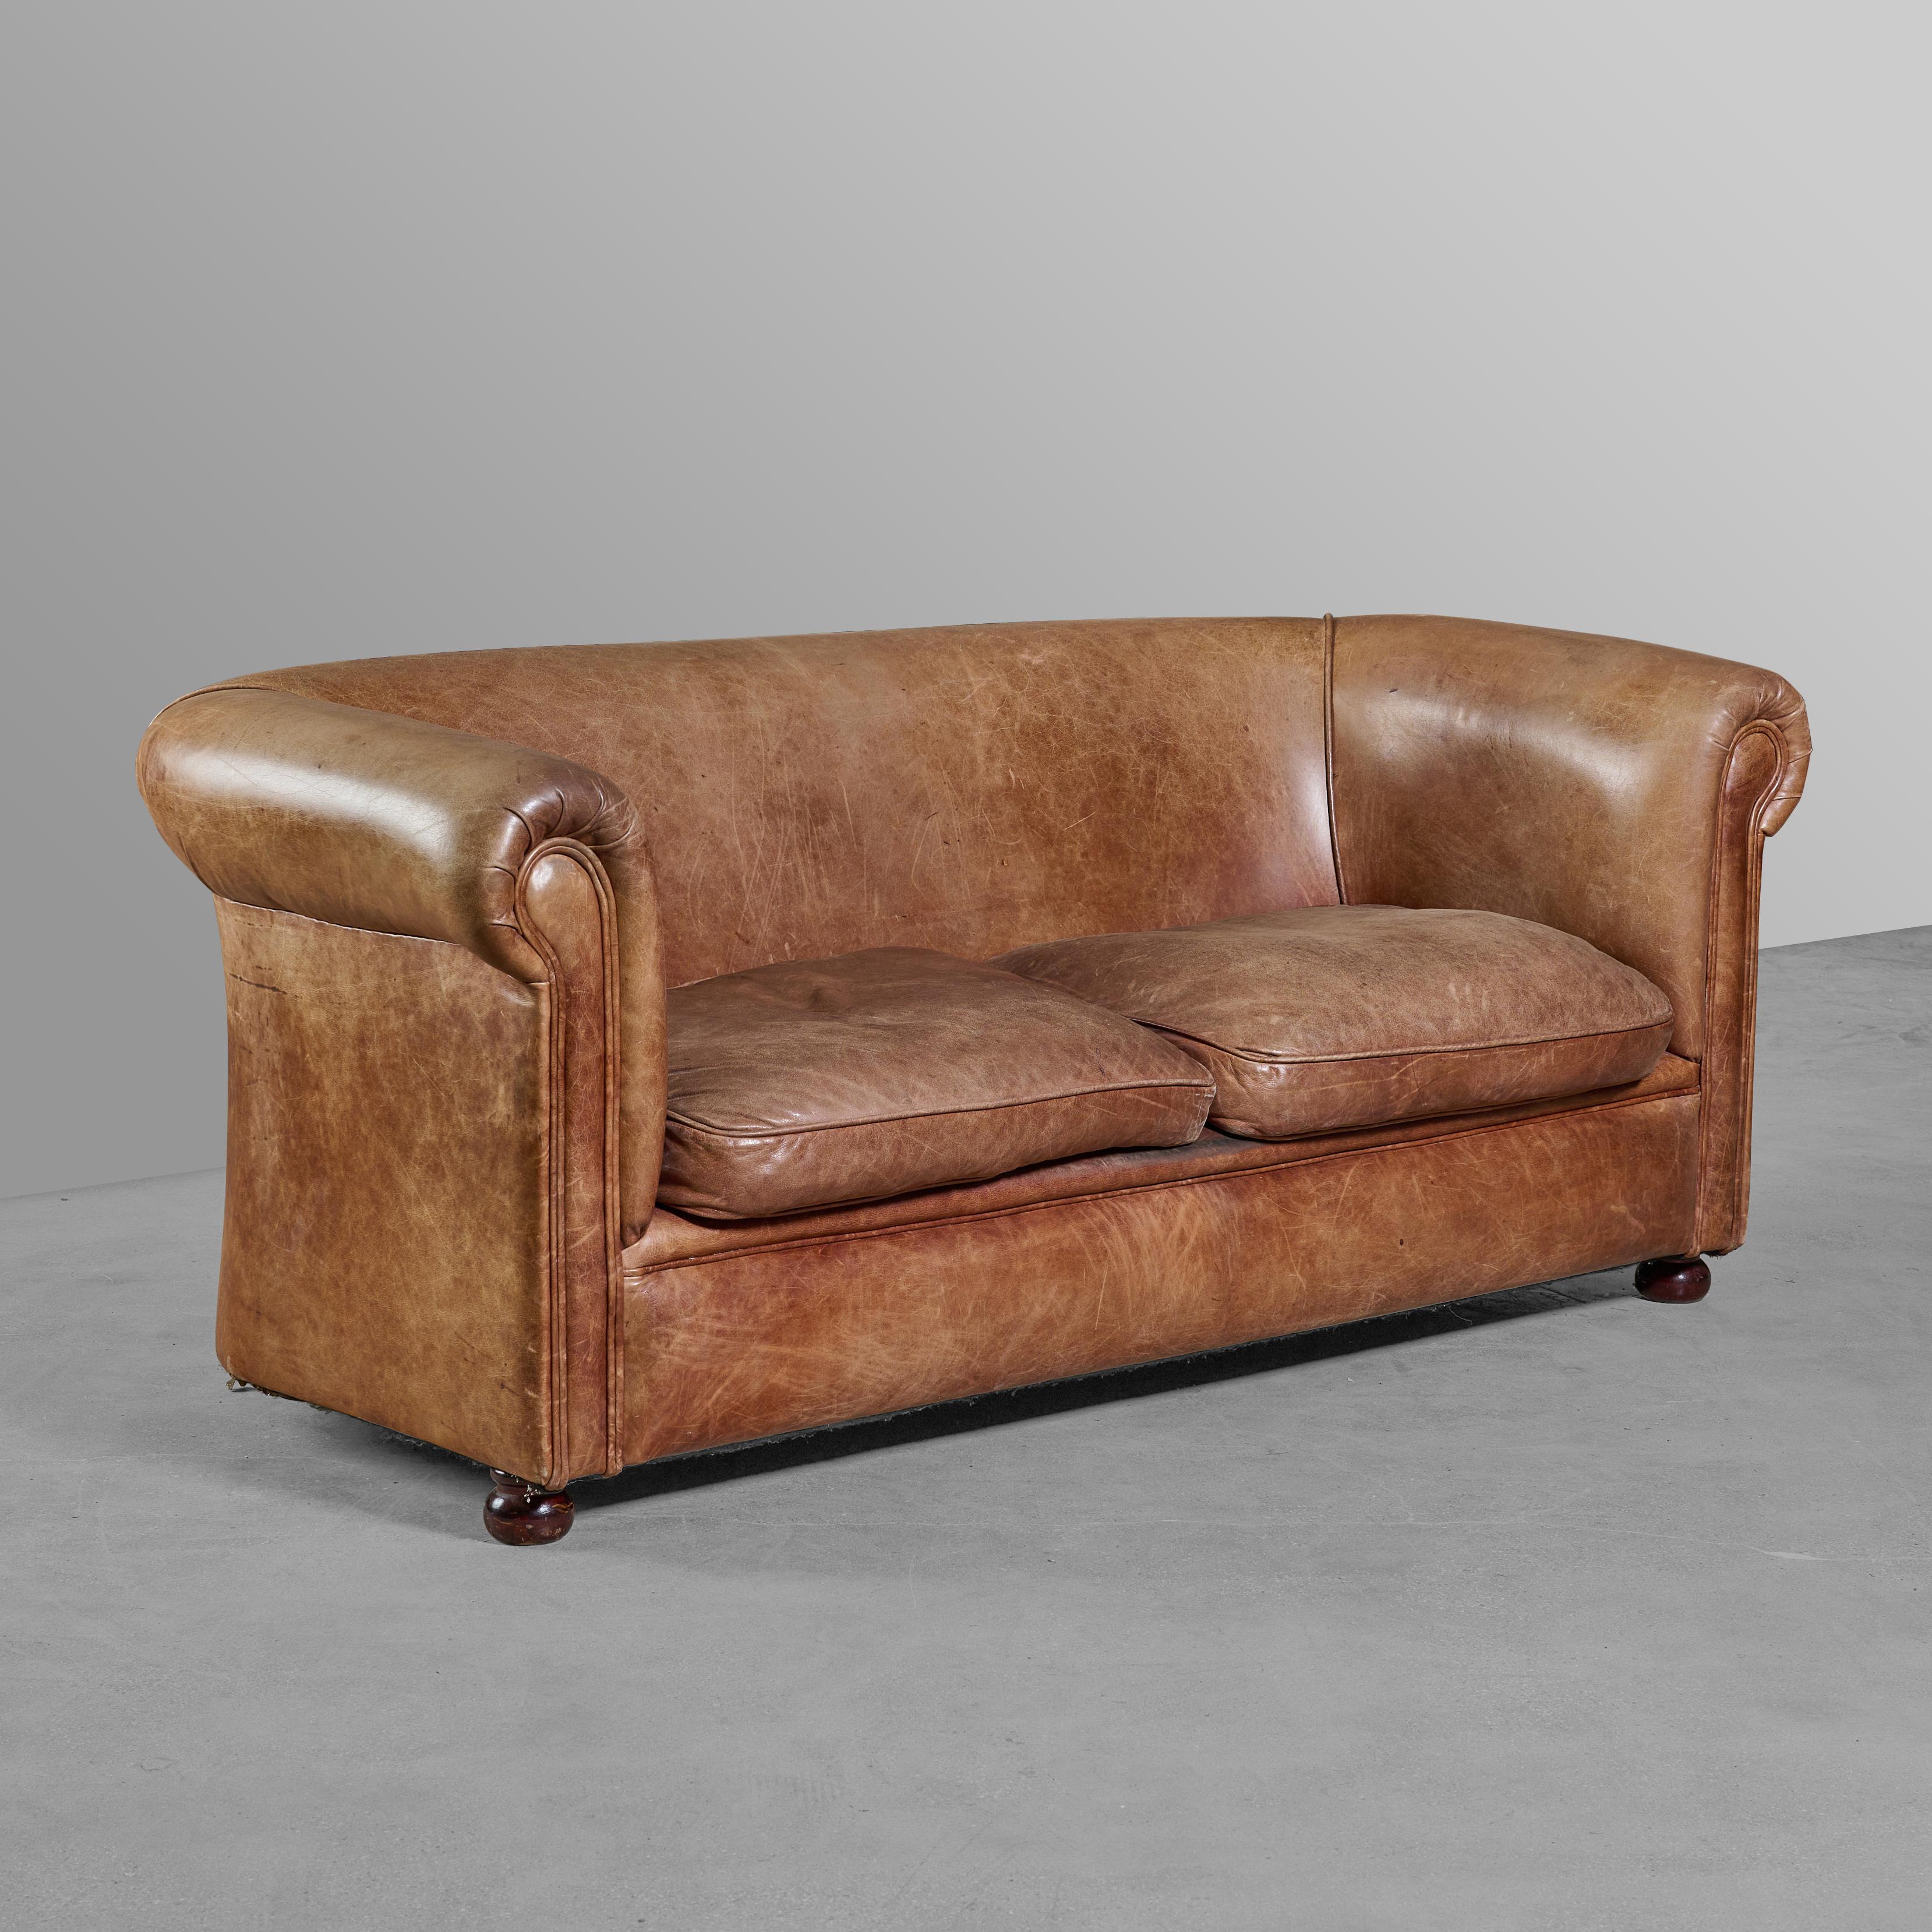 Leather and wood club style sofa. Great color and patina.

